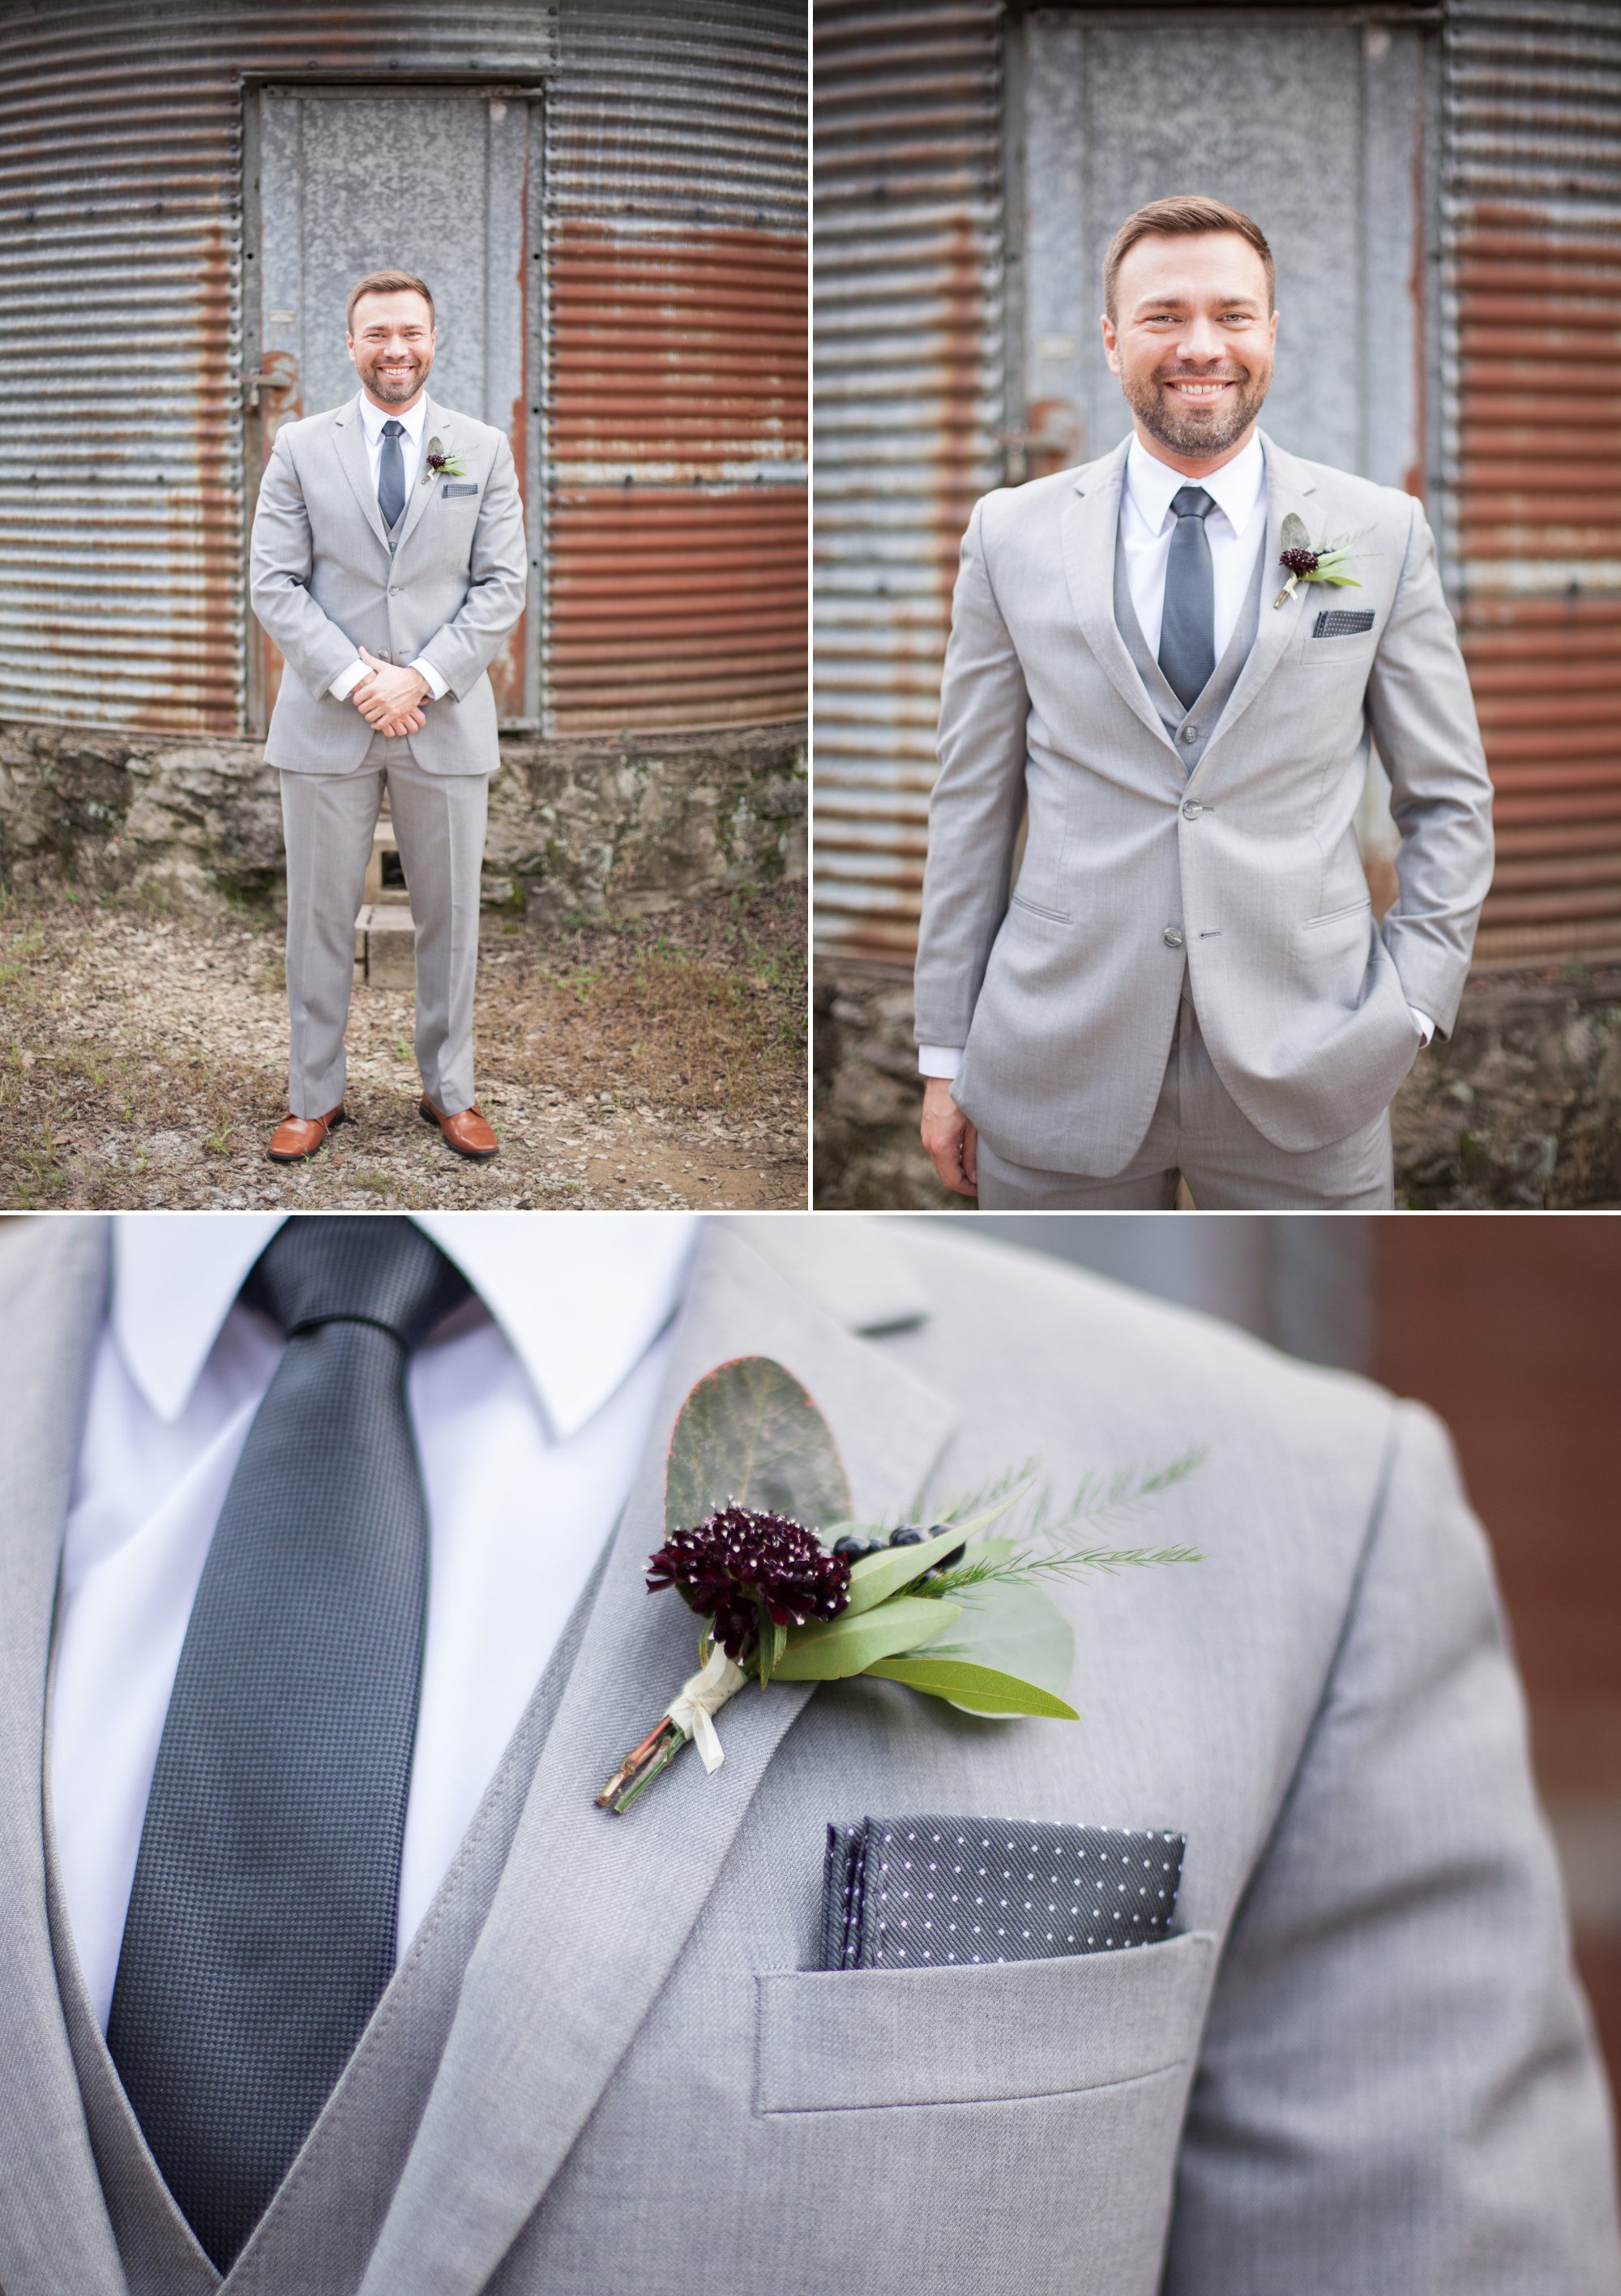 Groom portraits and boutineer photos before wedding ceremony photography at Green Door Gourmet in Nashville, TN